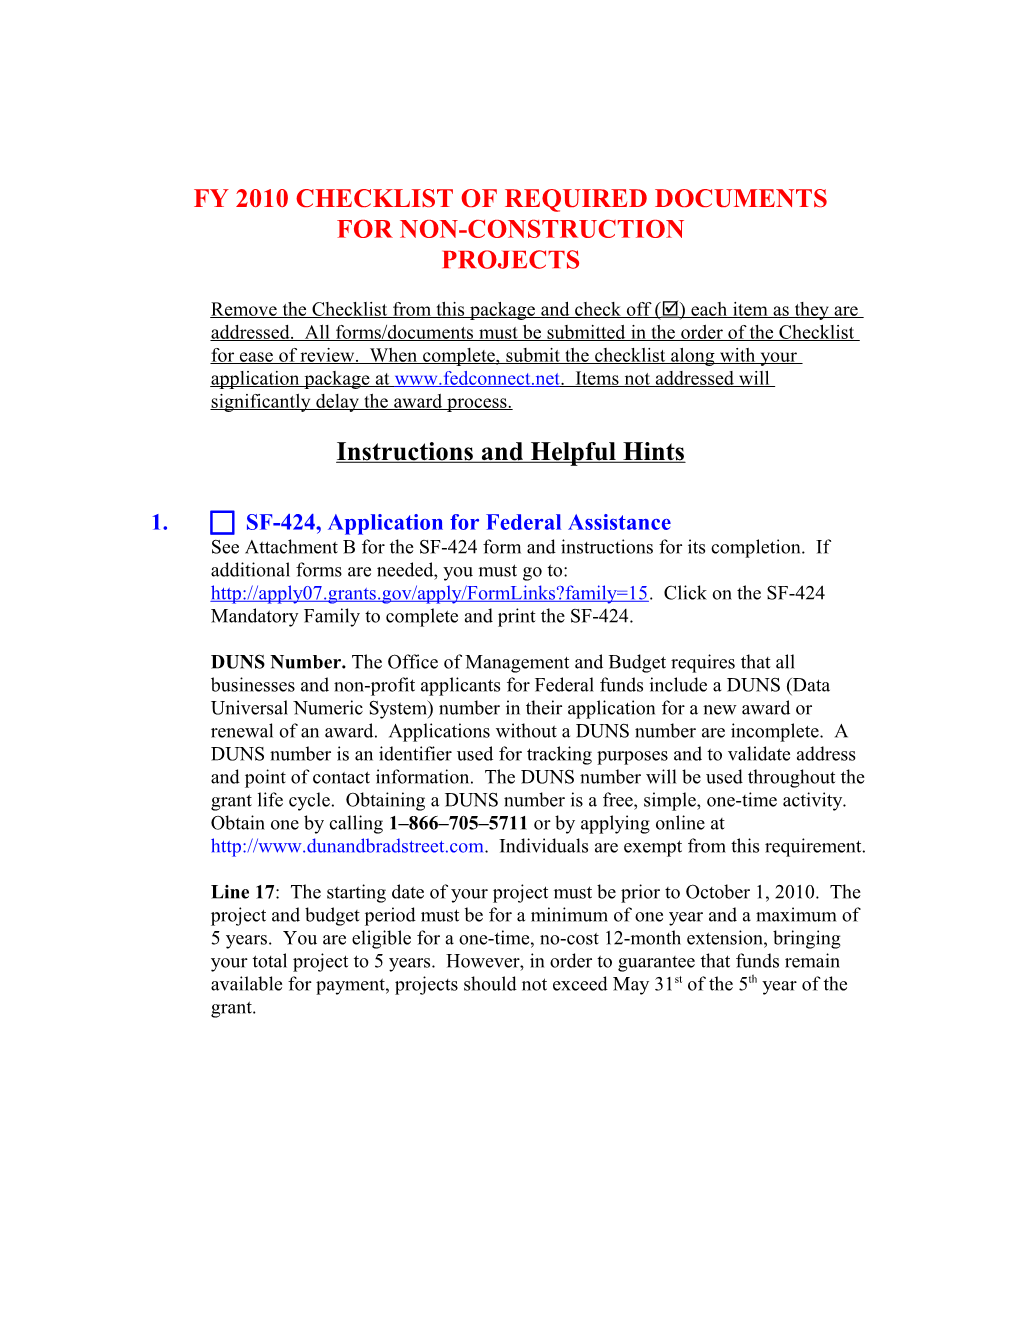 Fy 2010 Checklist of Required Documents